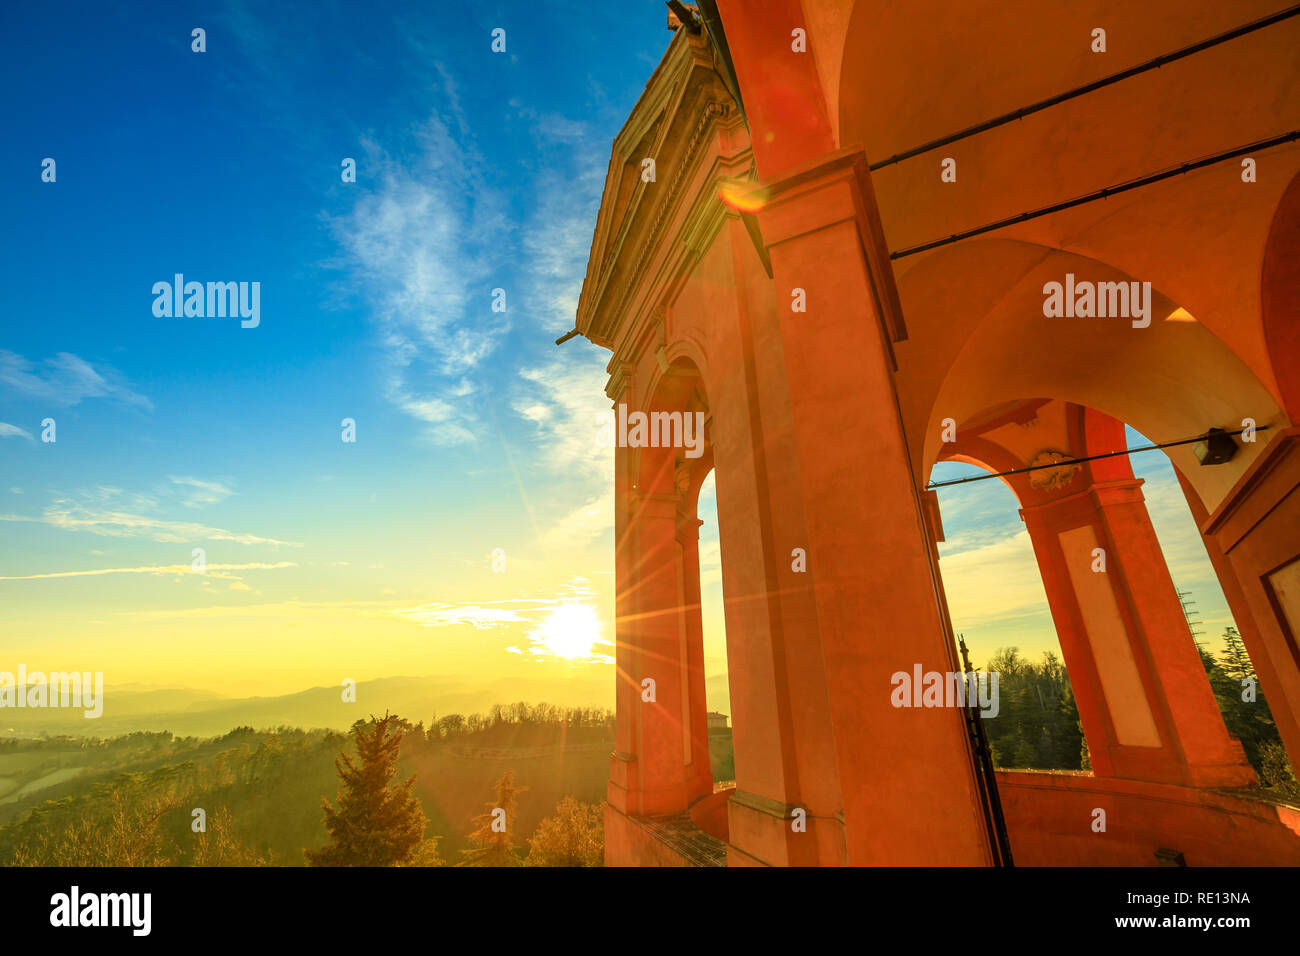 Arches of Sanctuary of Blessed Virgin of St. Luke on Colle della Guardia. Spectacular landscape of Bologna hills at sunset light. Famous pilgrimage destination in Emilia-Romagna, Italy, Europe. Stock Photo